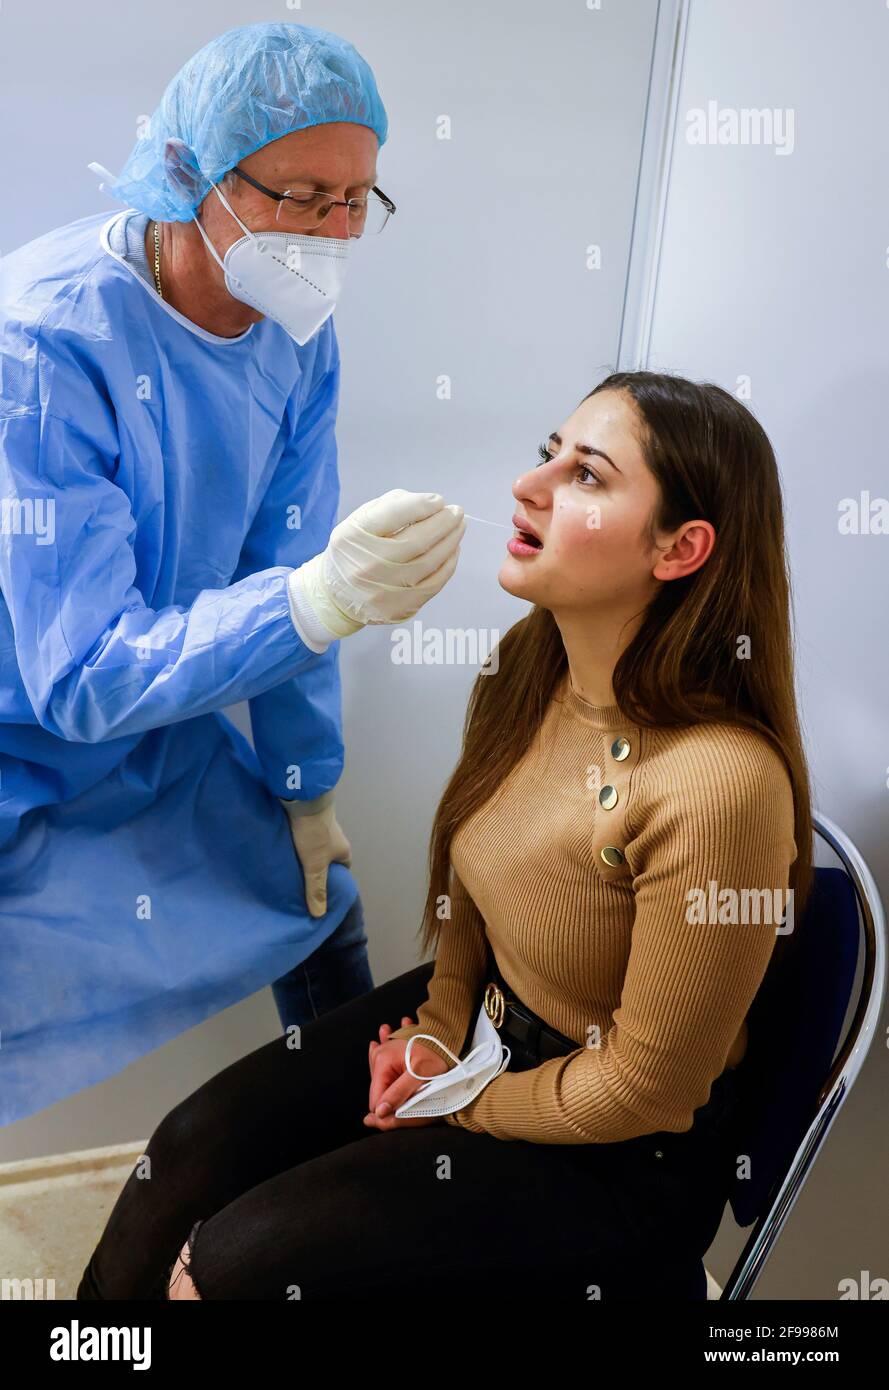 Essen, North Rhine-Westphalia, Germany - Corona test center Grugahalle open for free citizen test, Covid rapid test, a doctor tests a young woman for the corona virus using a throat swab, from March 8th, German citizens can have themselves tested for corona once a week free of charge in the rapid test center. Stock Photo